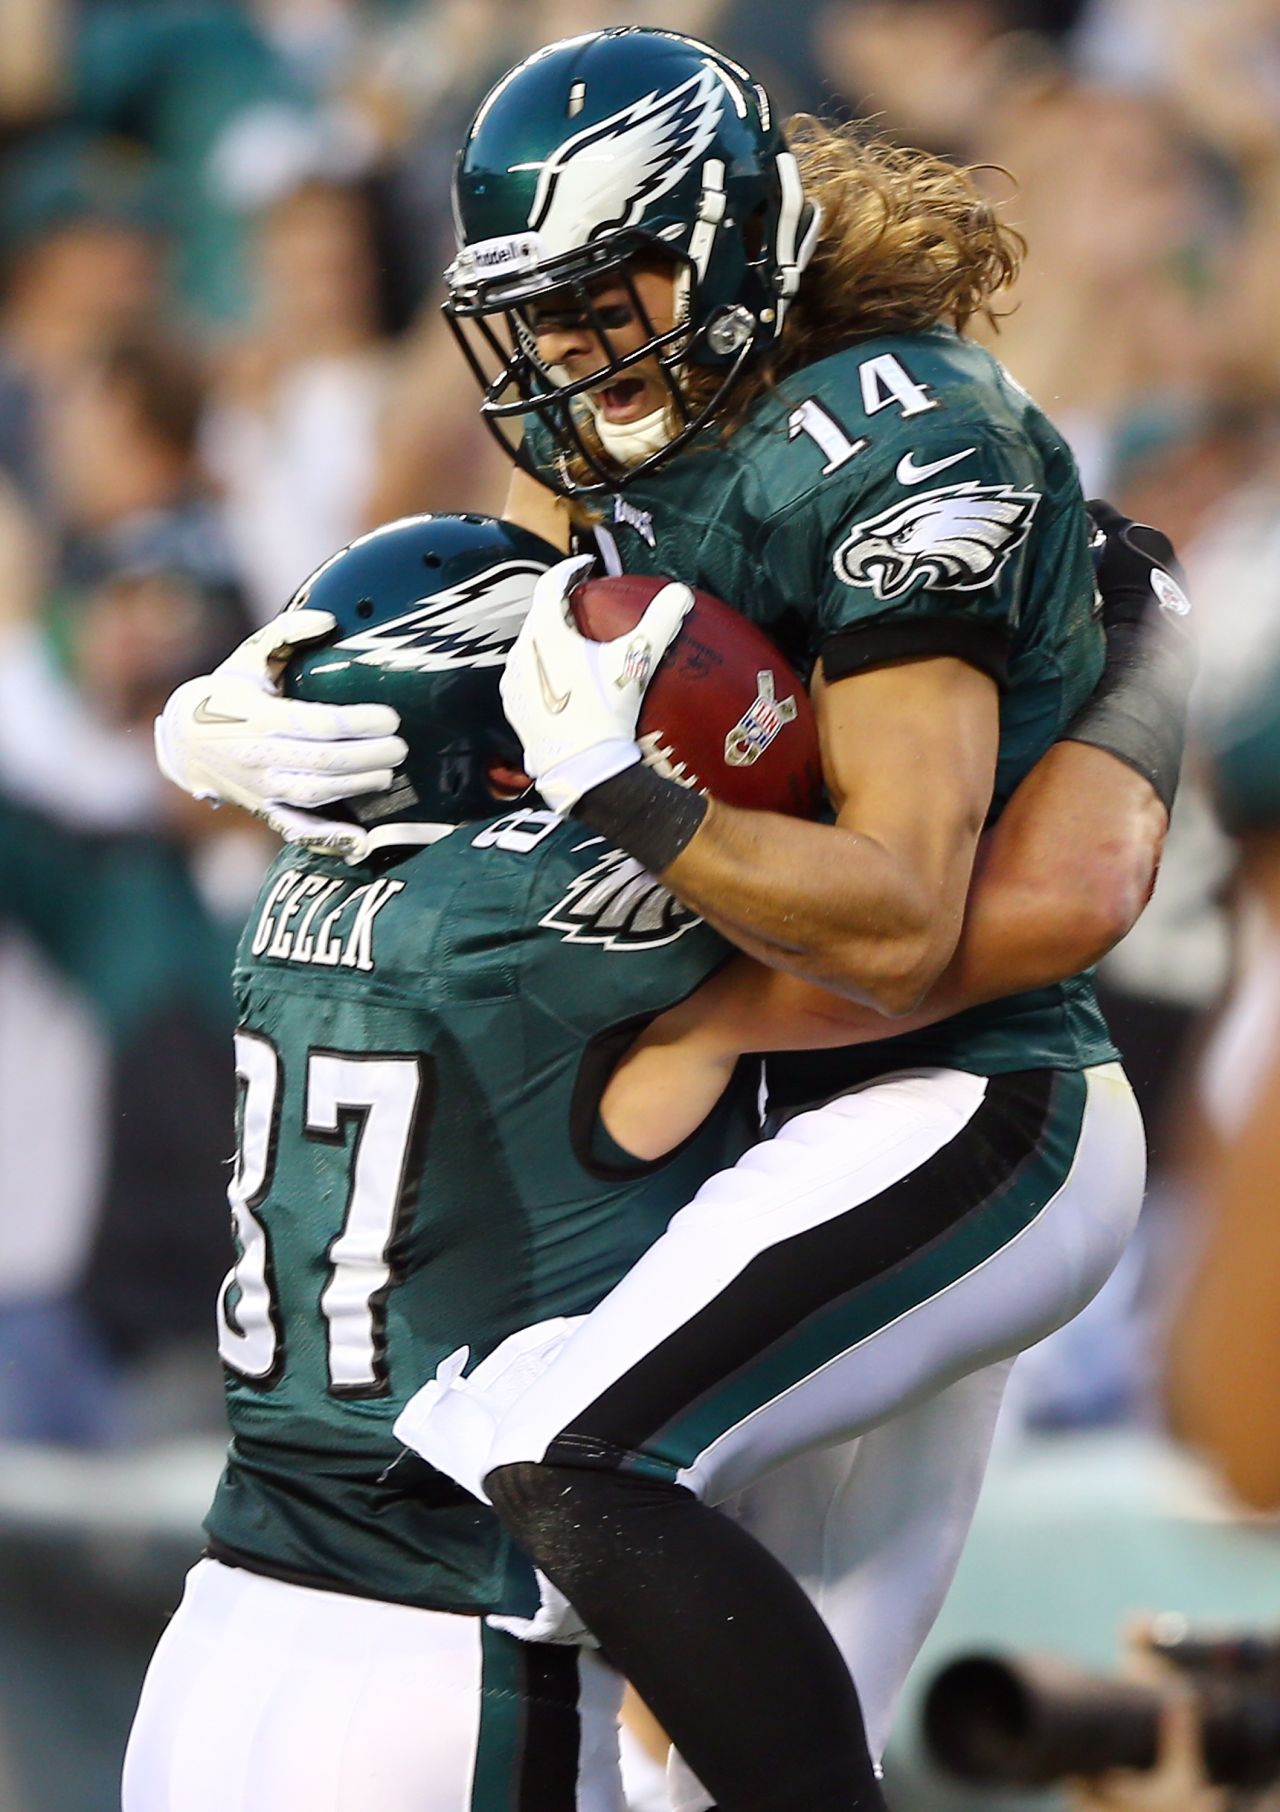 Riley Cooper of the Eagles celebrates his touchdown with teammate Brent Celek in the first quarter against the Cowboys on Sunday.